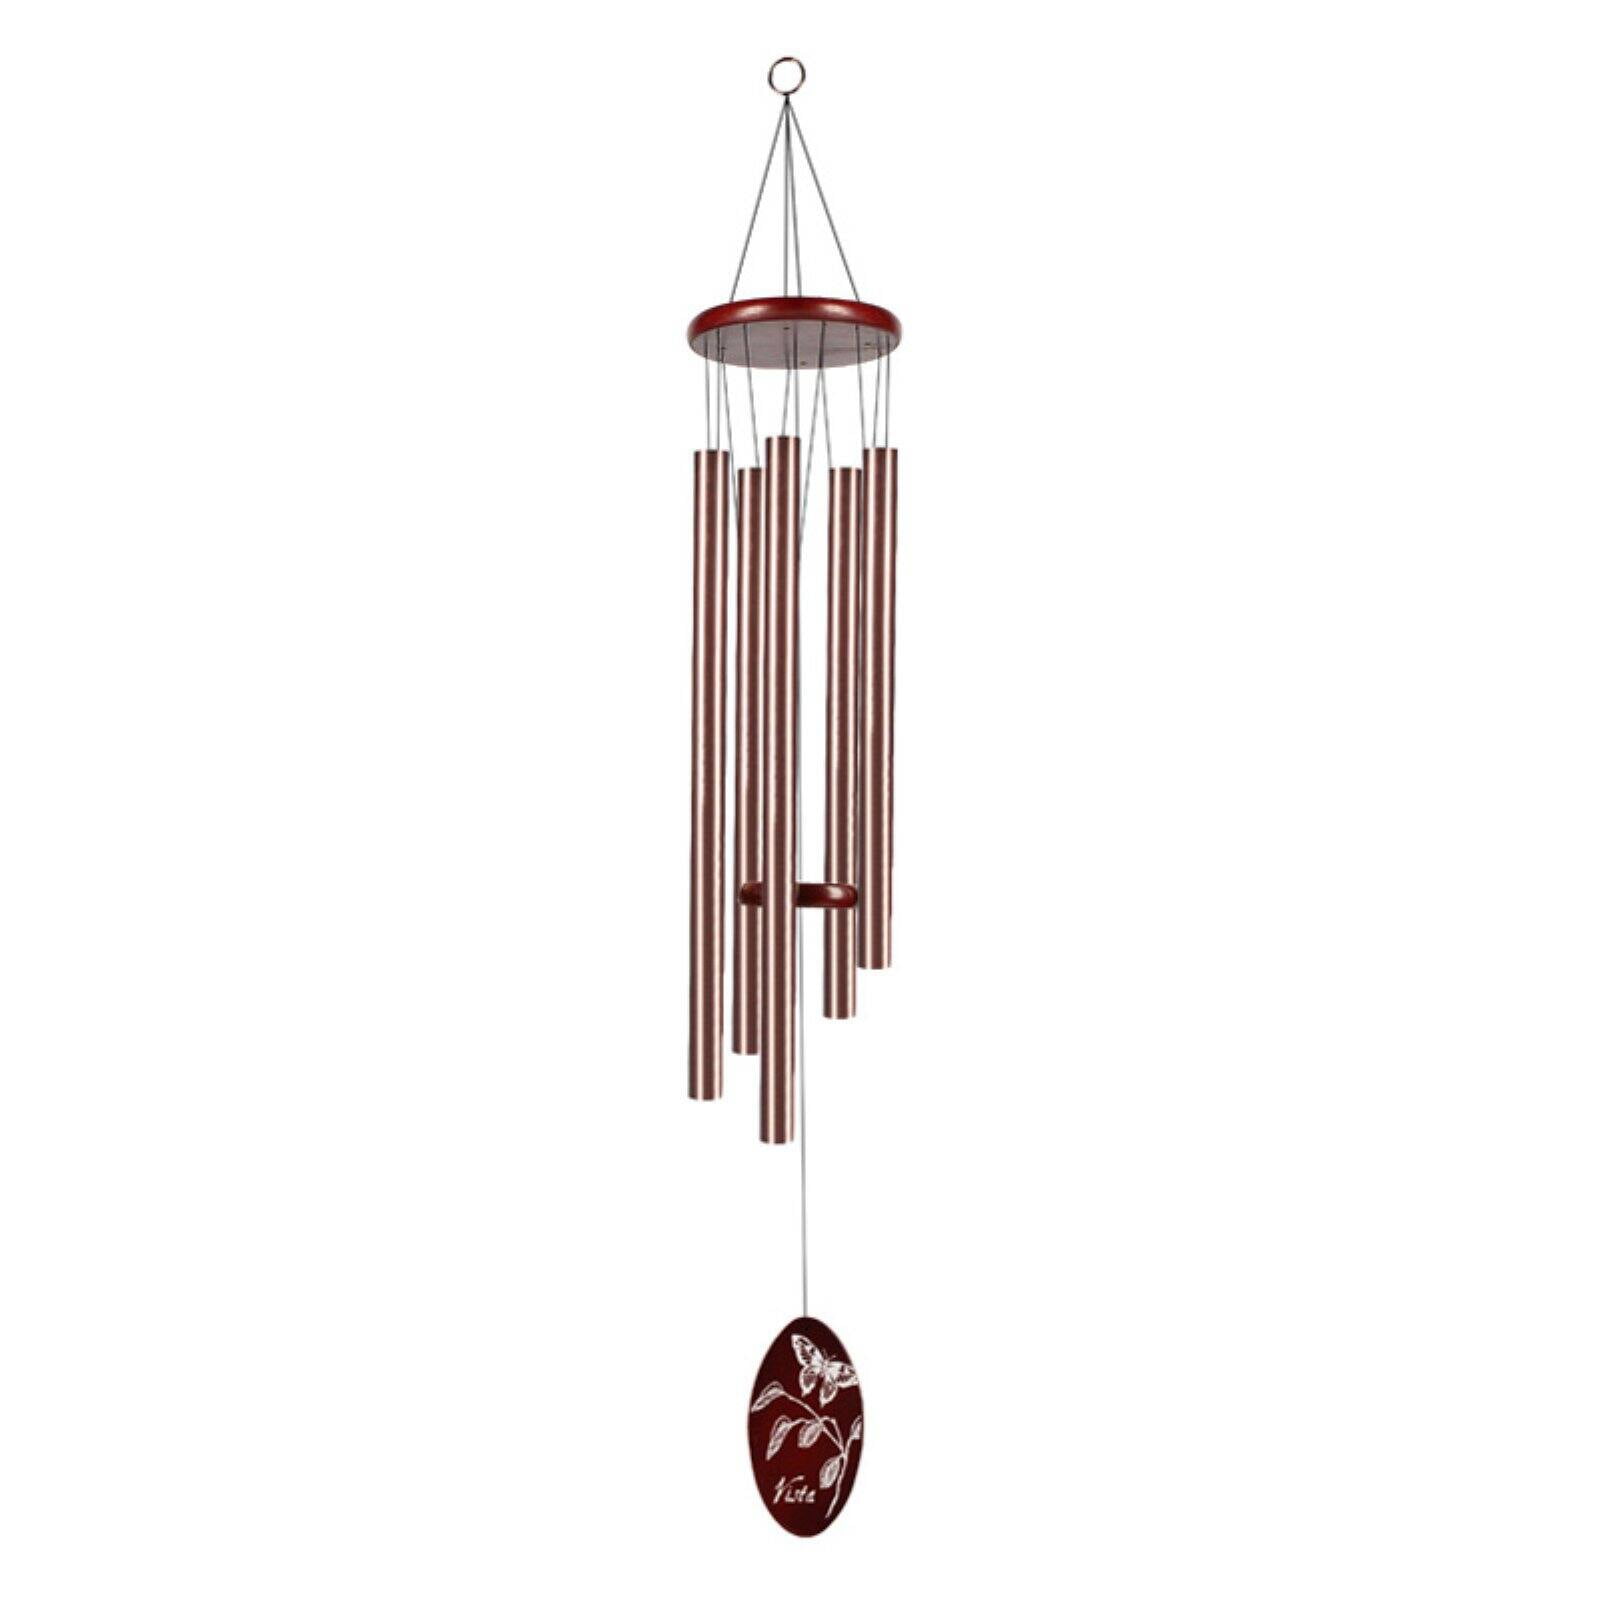 Rustic Metal Fishing Garden Wind Chime 27" Long by Sunset Vista 